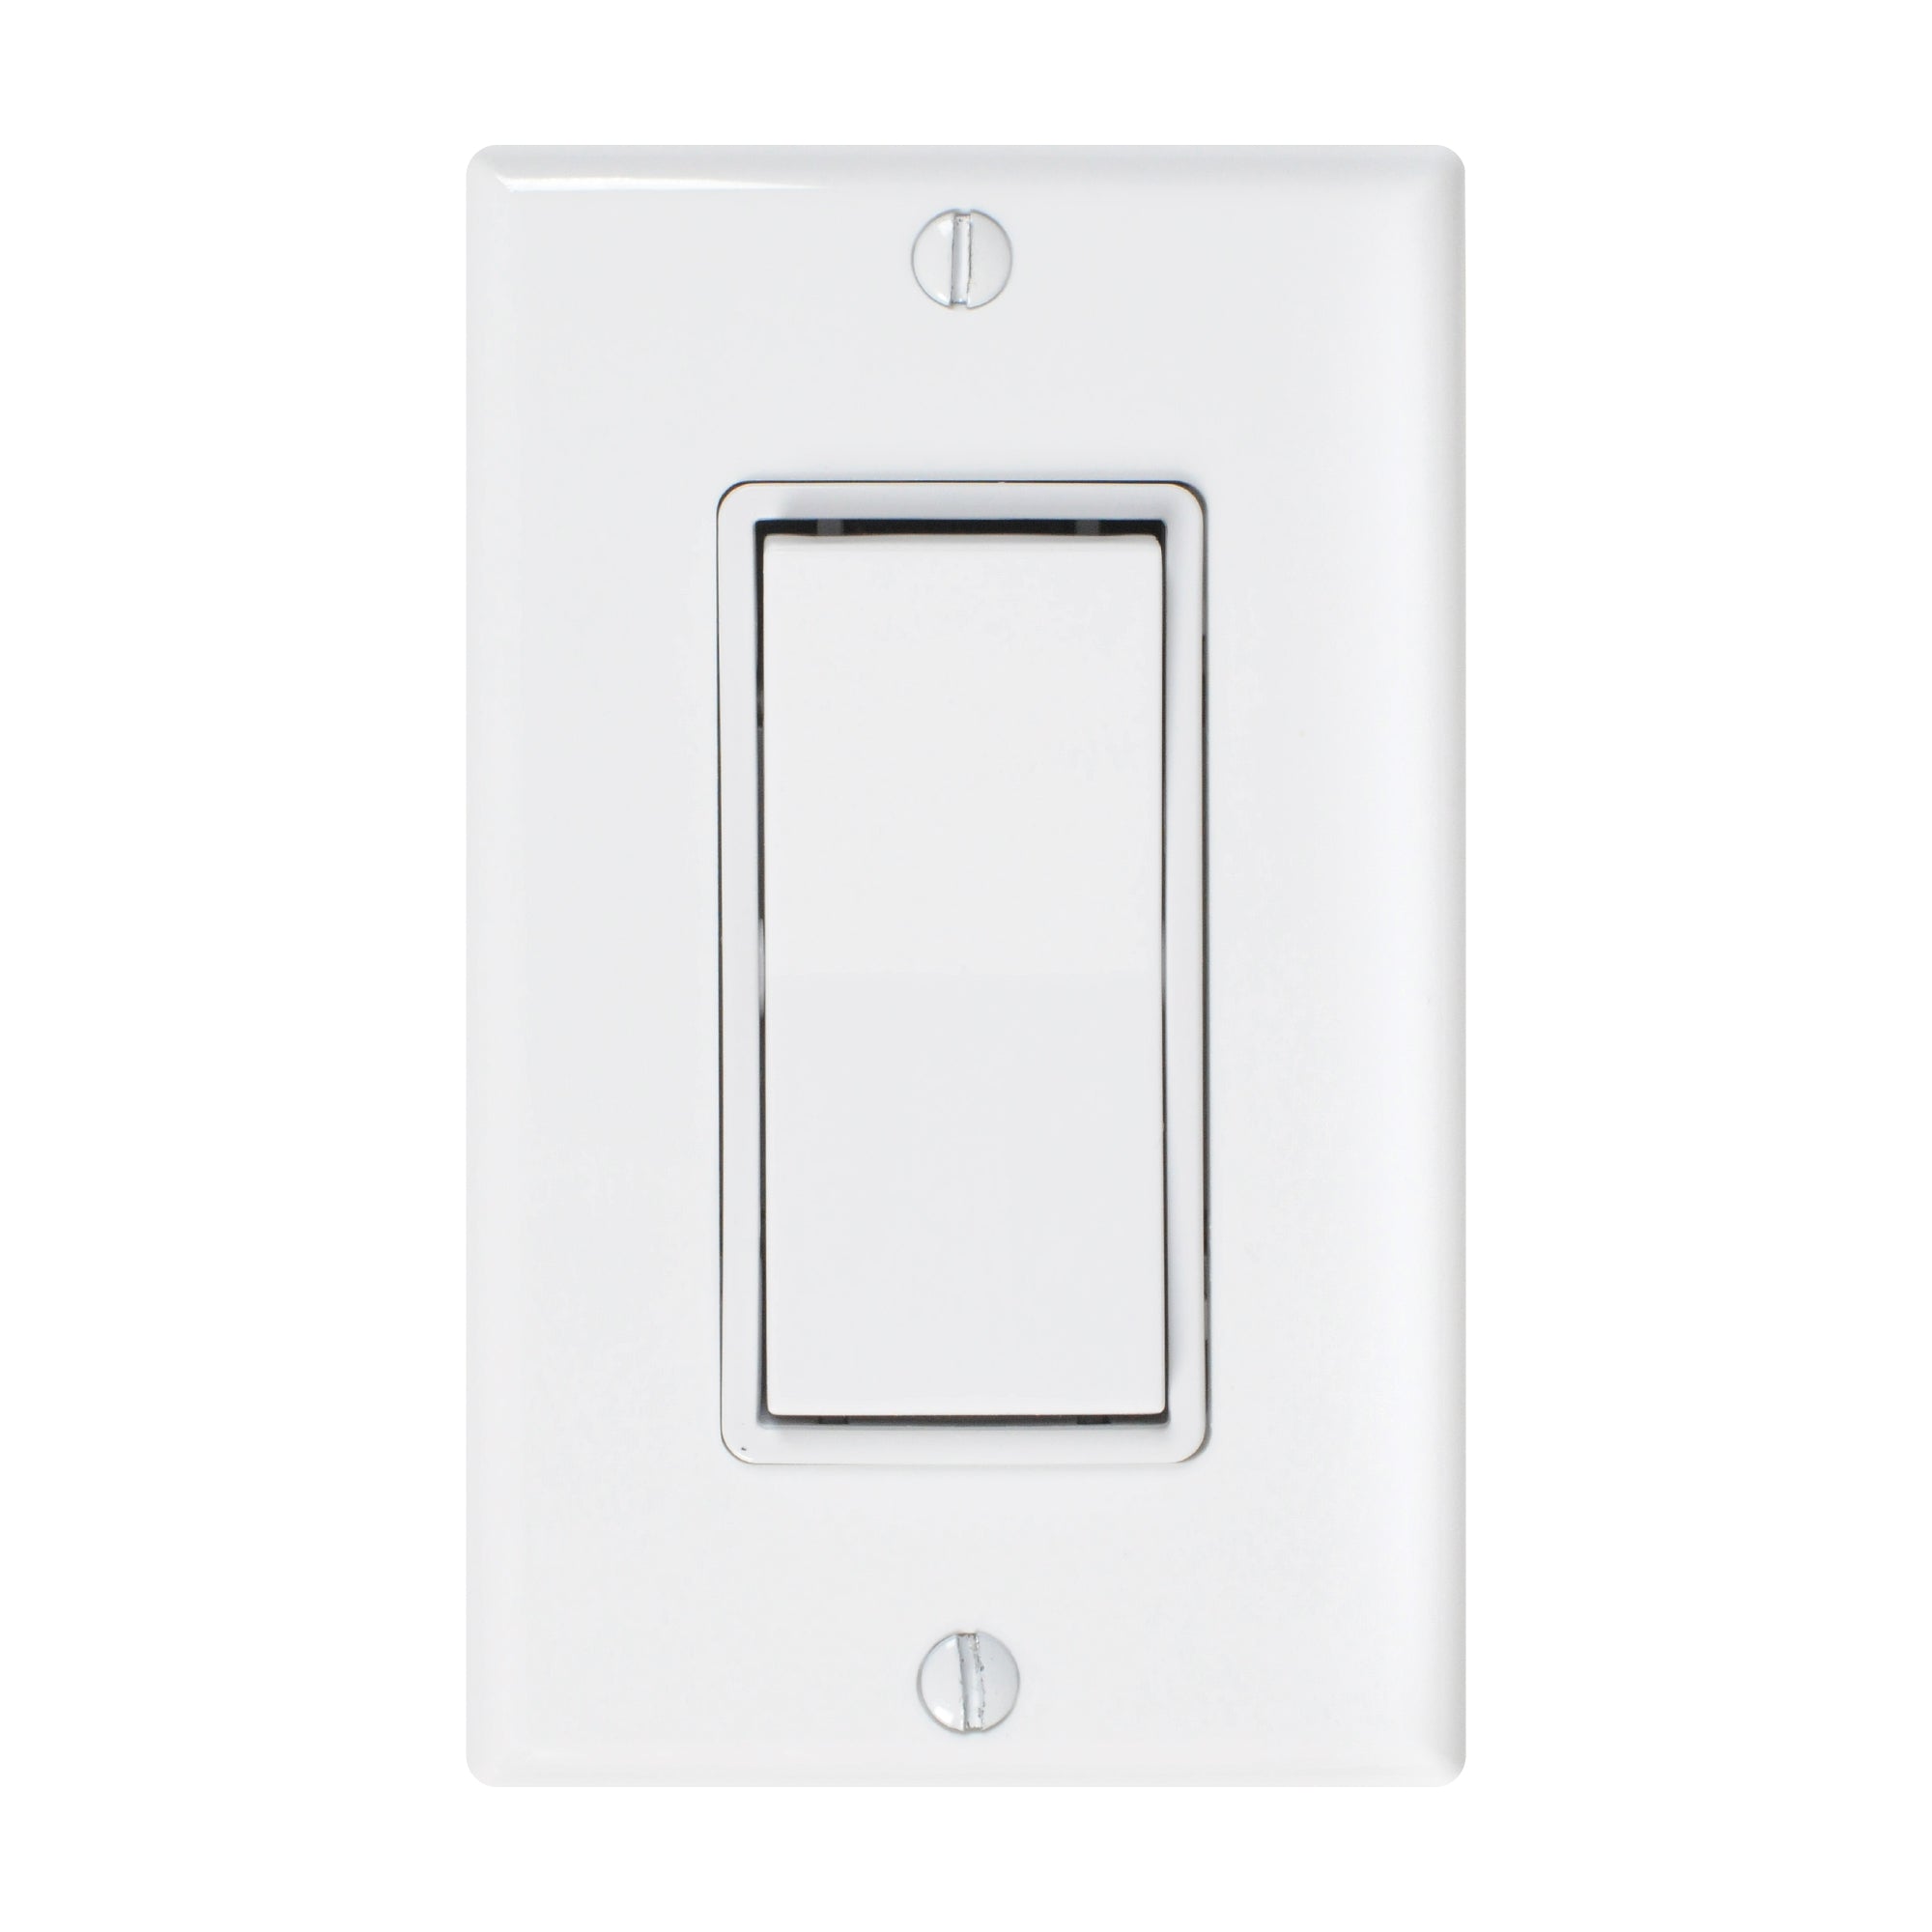 CLEANLIFE® Wireless Powerless Dimmer Switch